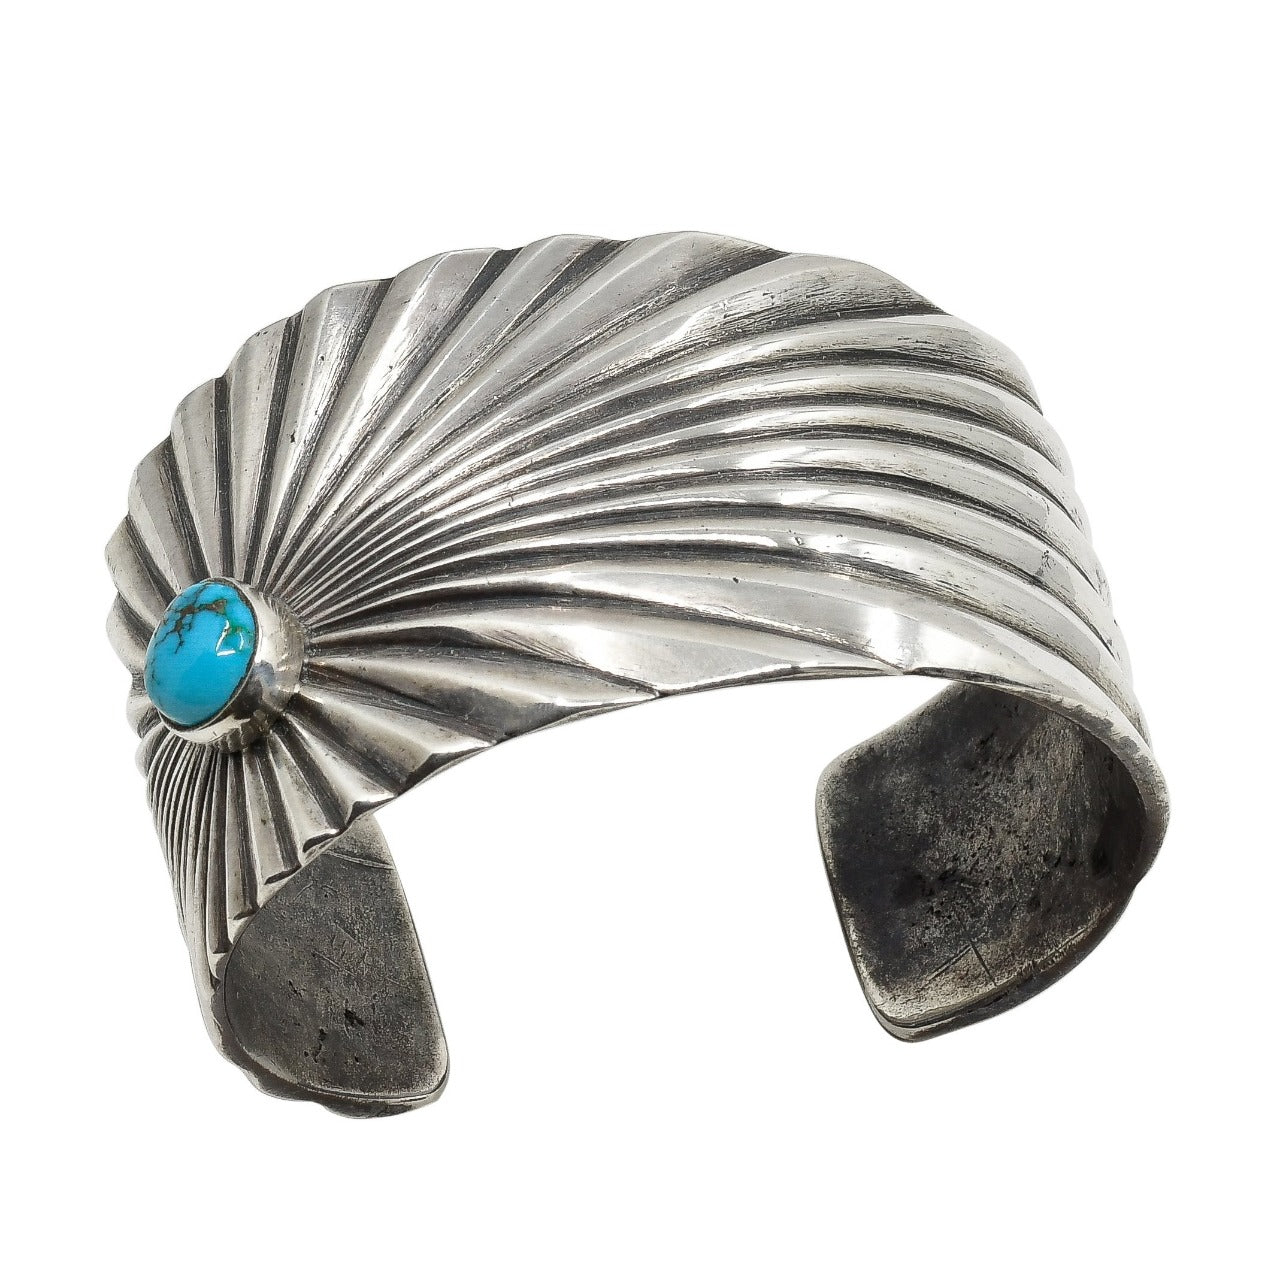 Wide Jesse Robbins Cuff of Ingot Silver and Turquoise